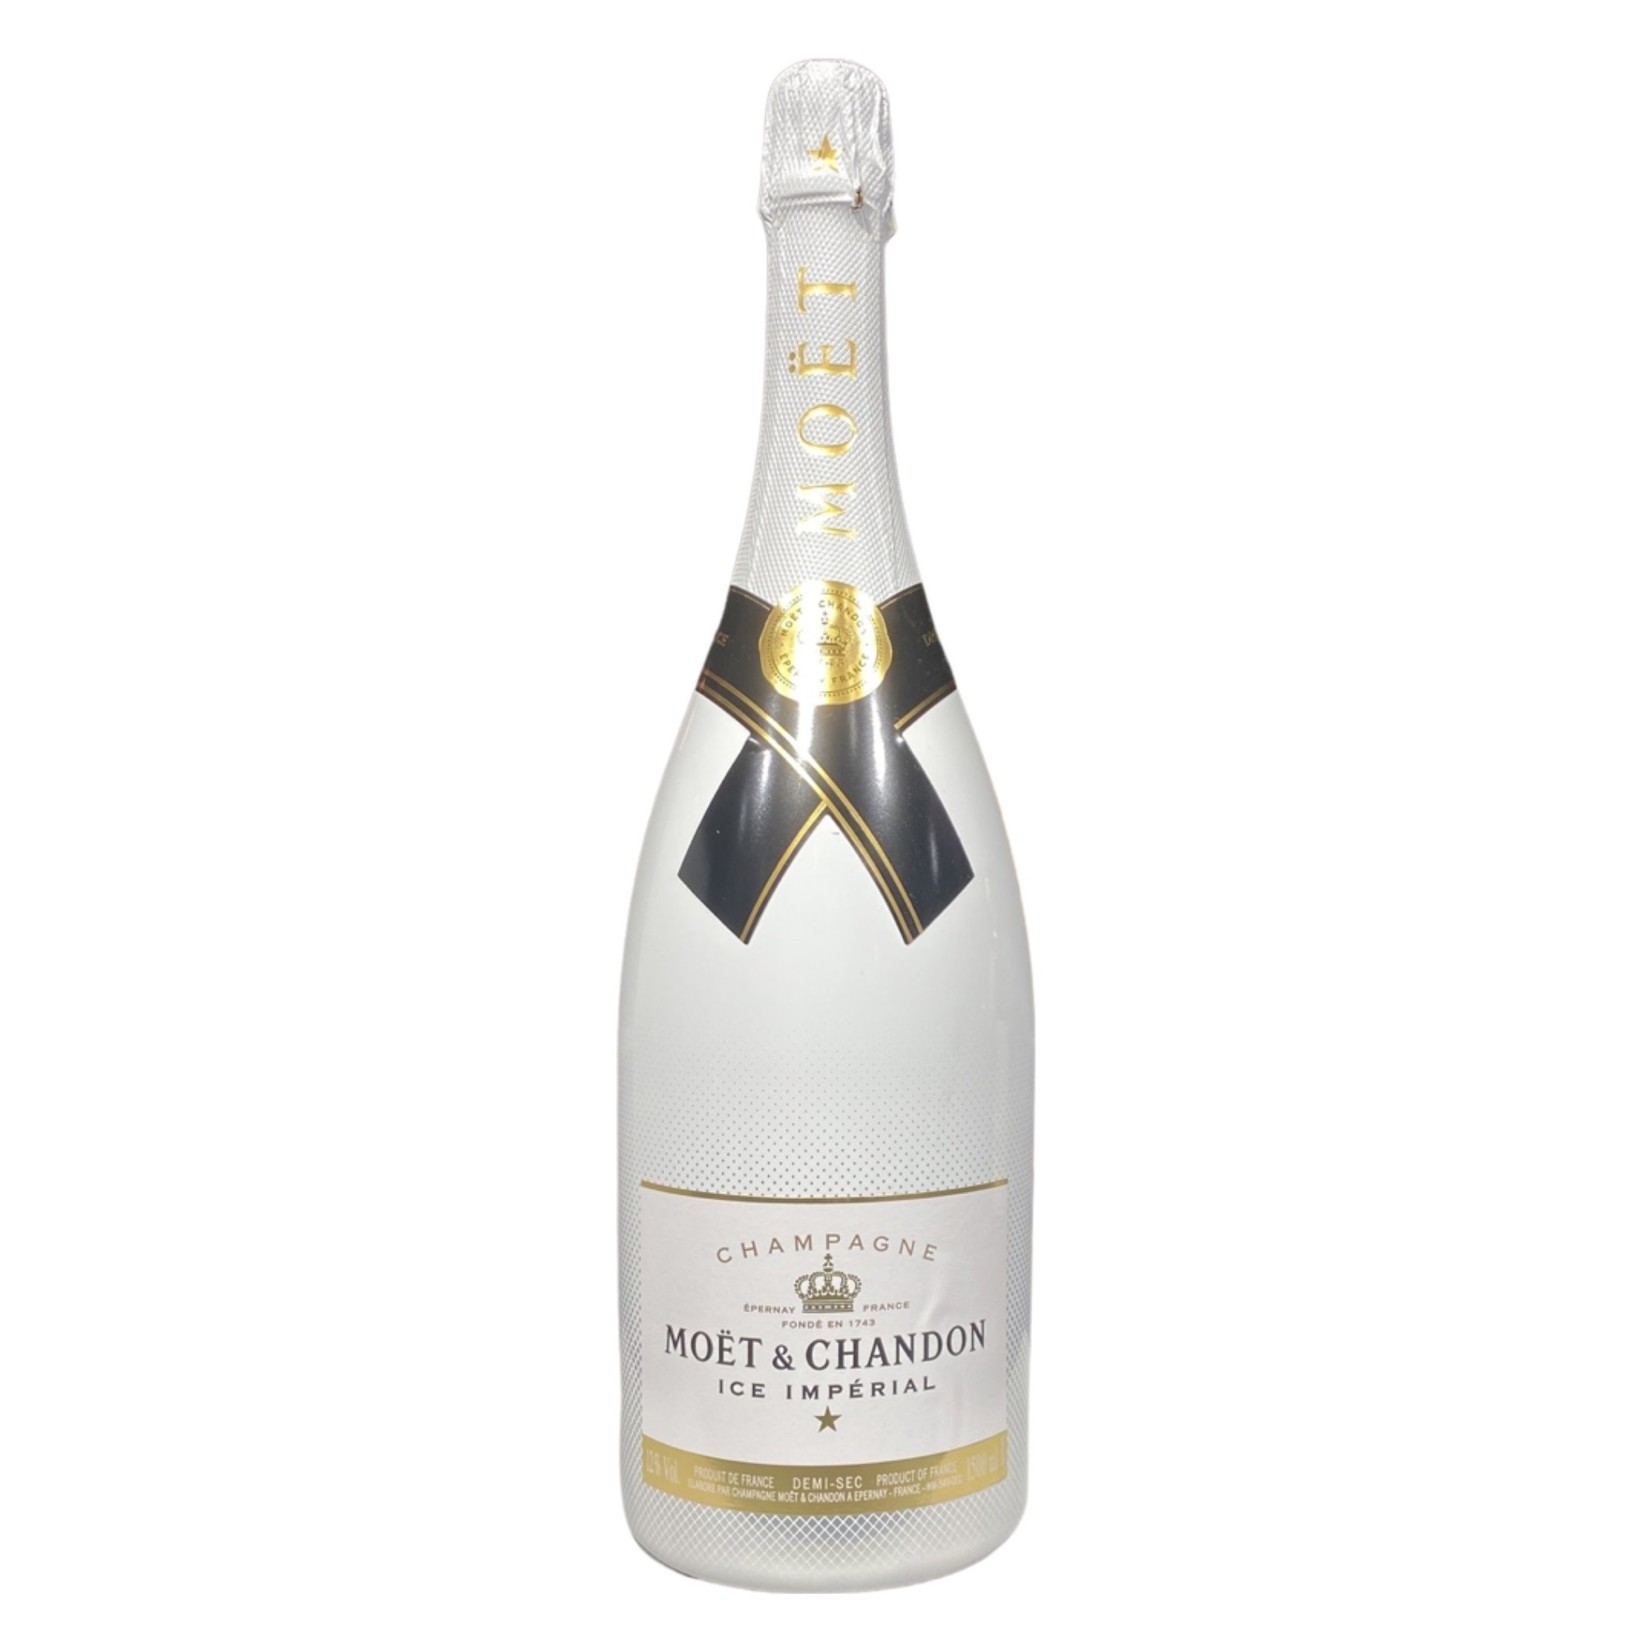 Champagne Demi-Sec Ice Imperial Moet & Chandon 1,5 ltr